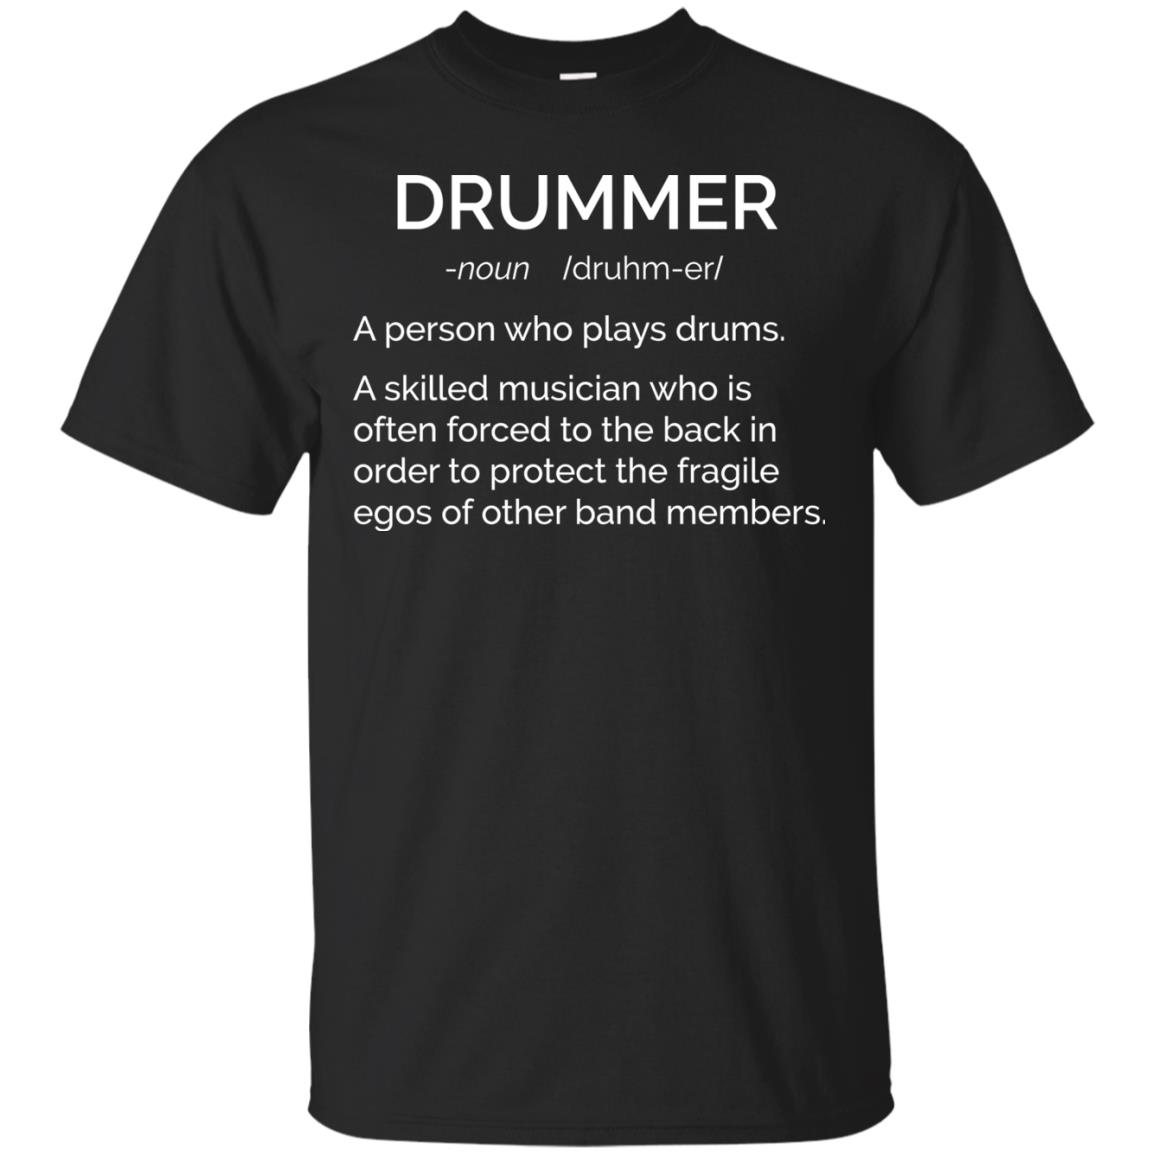 Drummer definition shirt: skilled musician often forced to the back ...